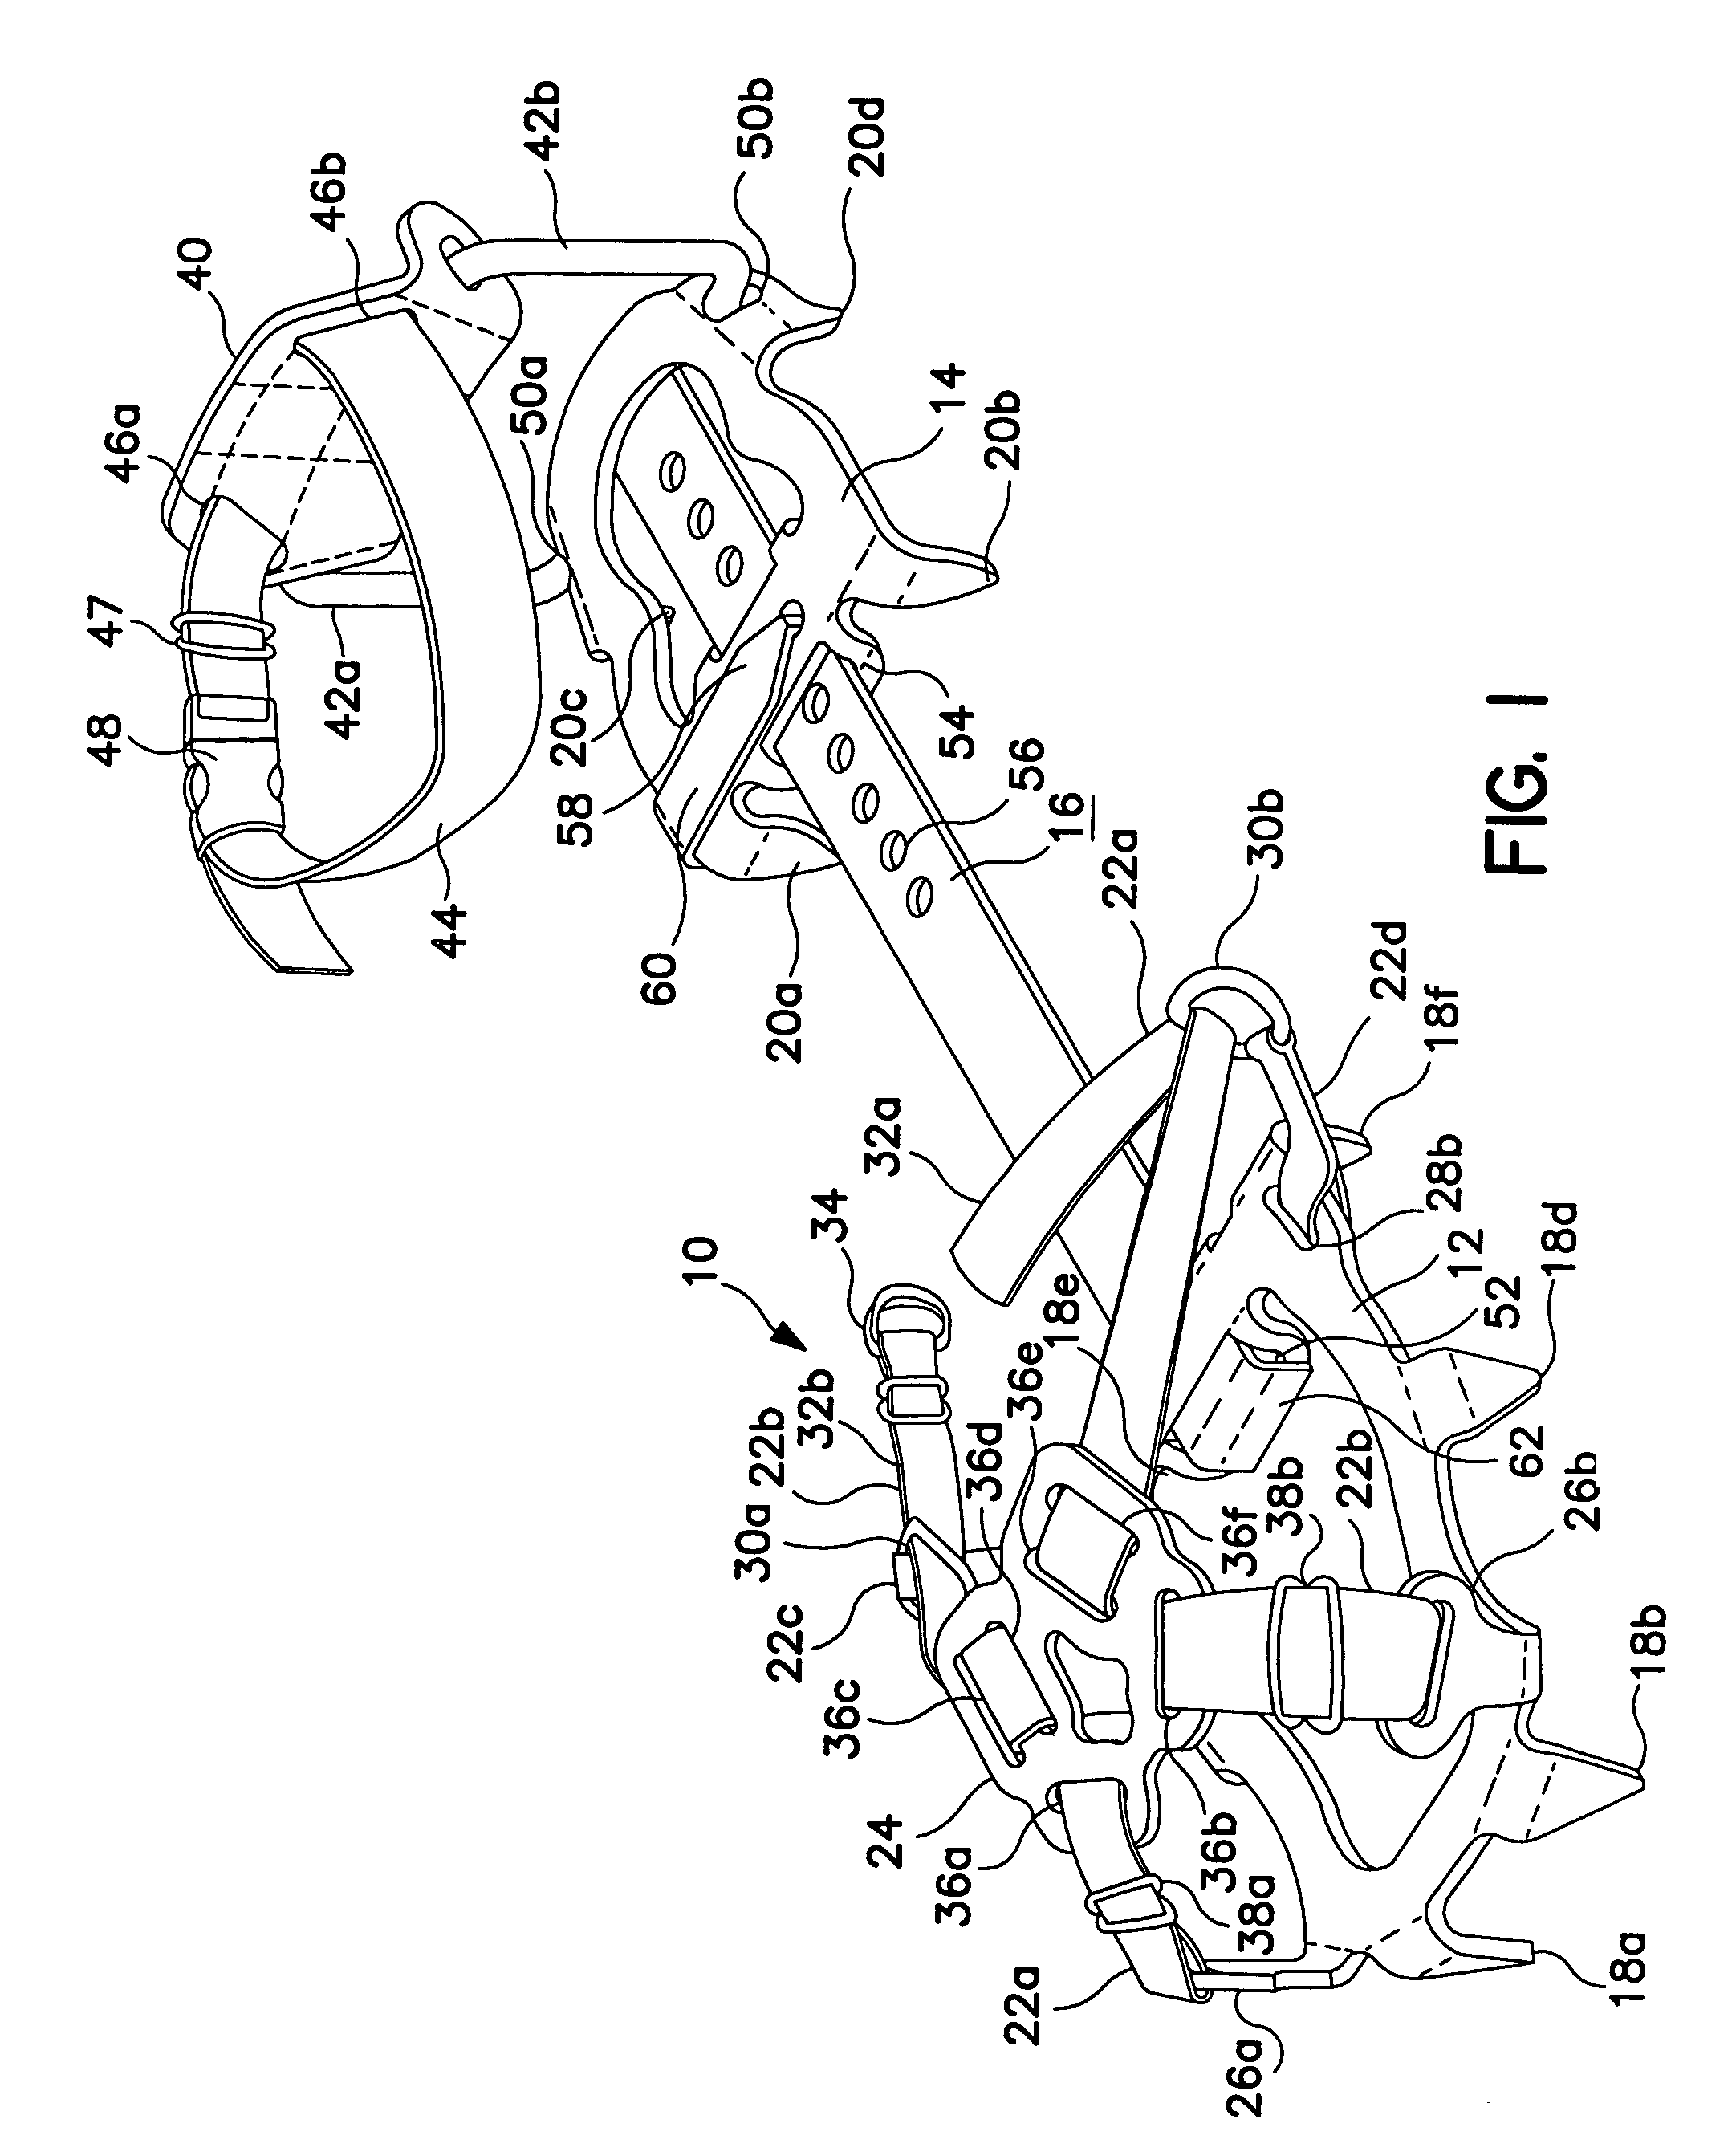 Flexible traction system for common shoes